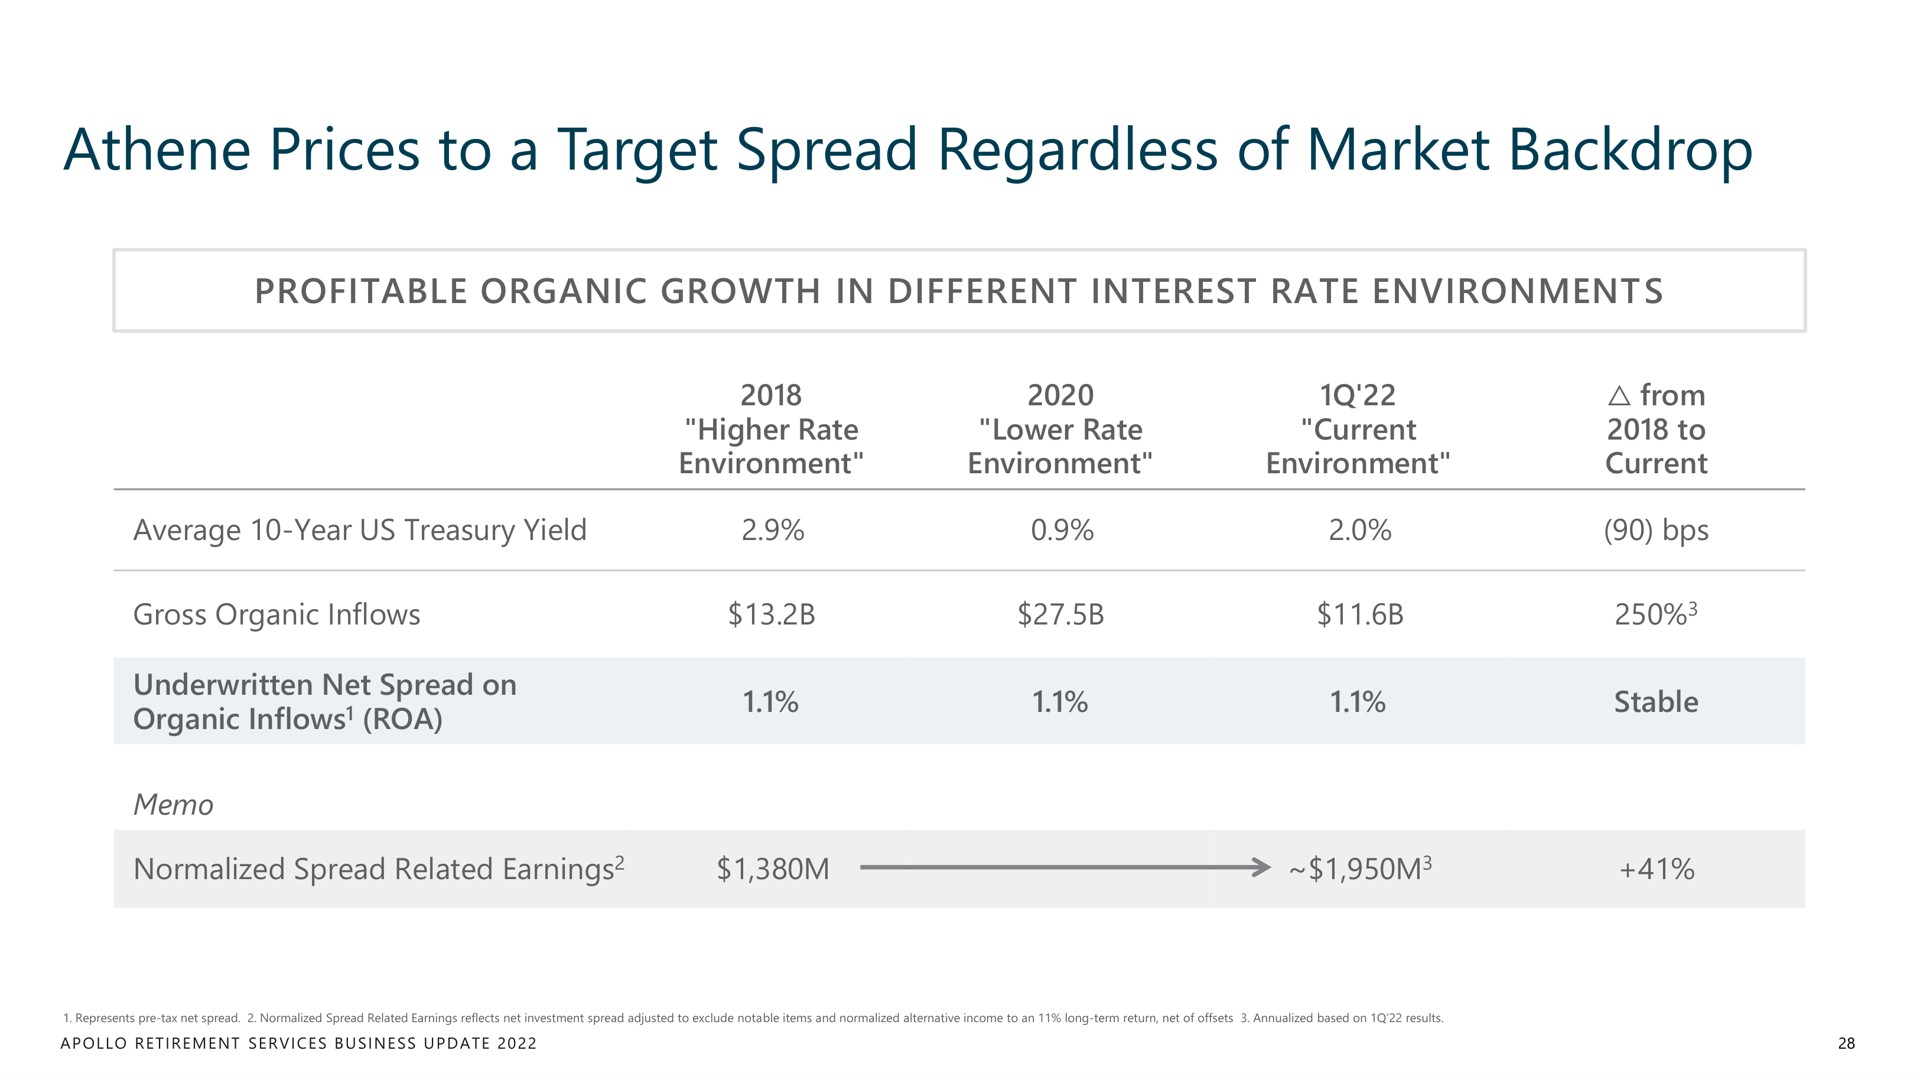 prices to a target spread regardless of market backdrop | Apollo Global Management